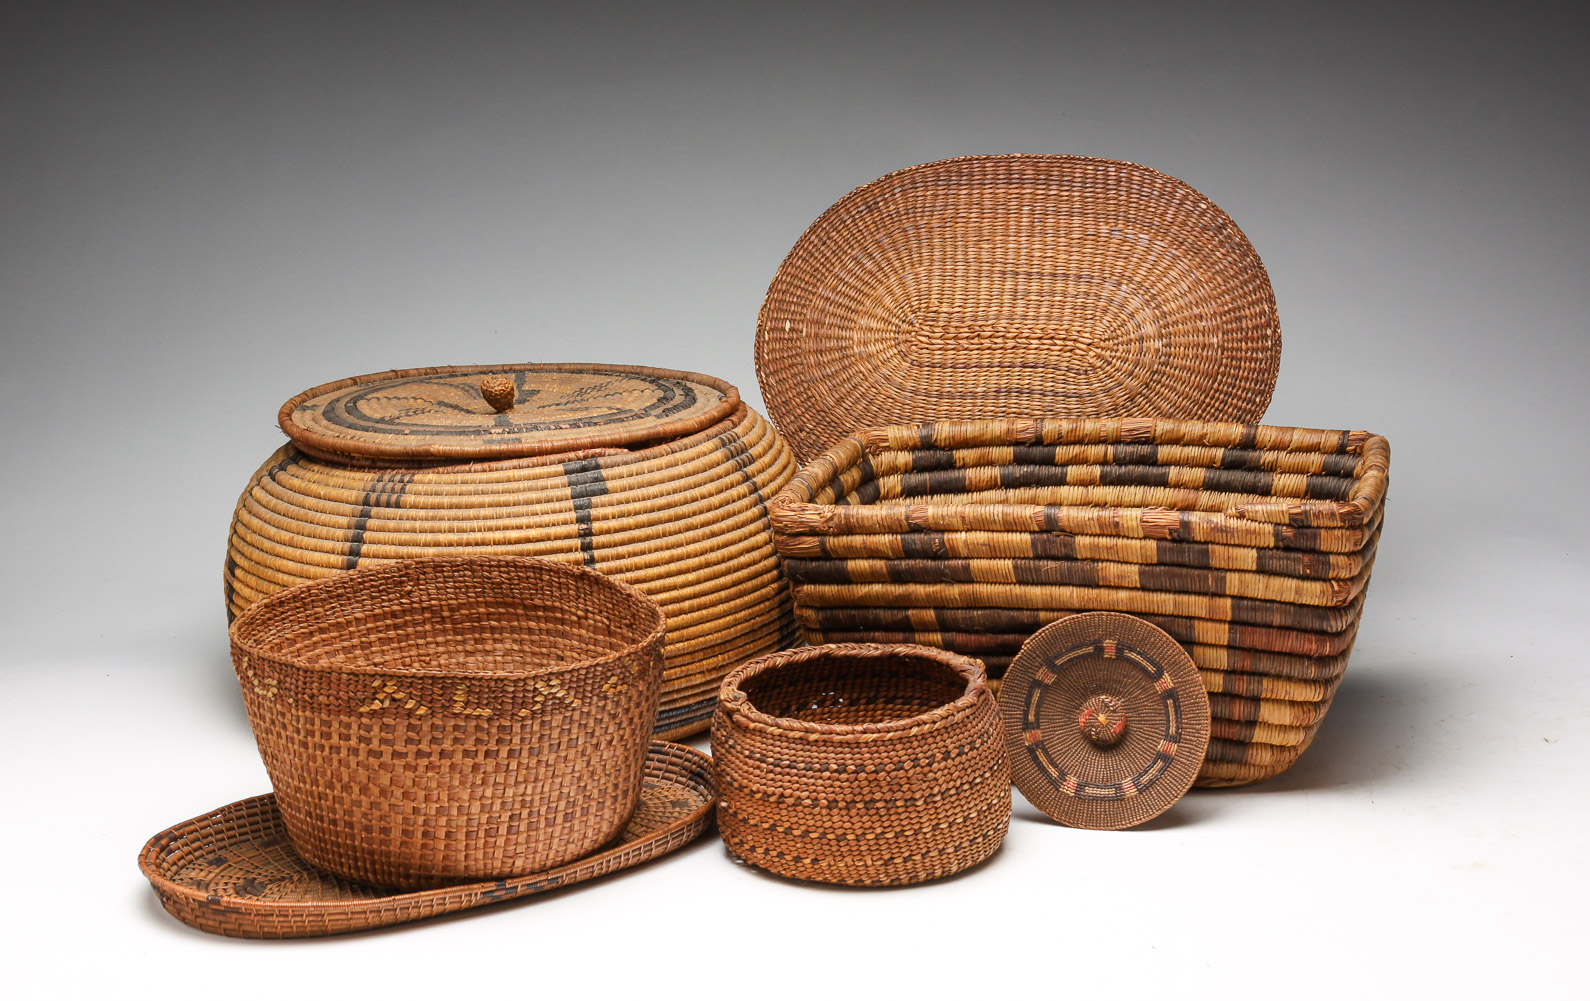 FOUR NATIVE AMERICAN BASKETS. Mid